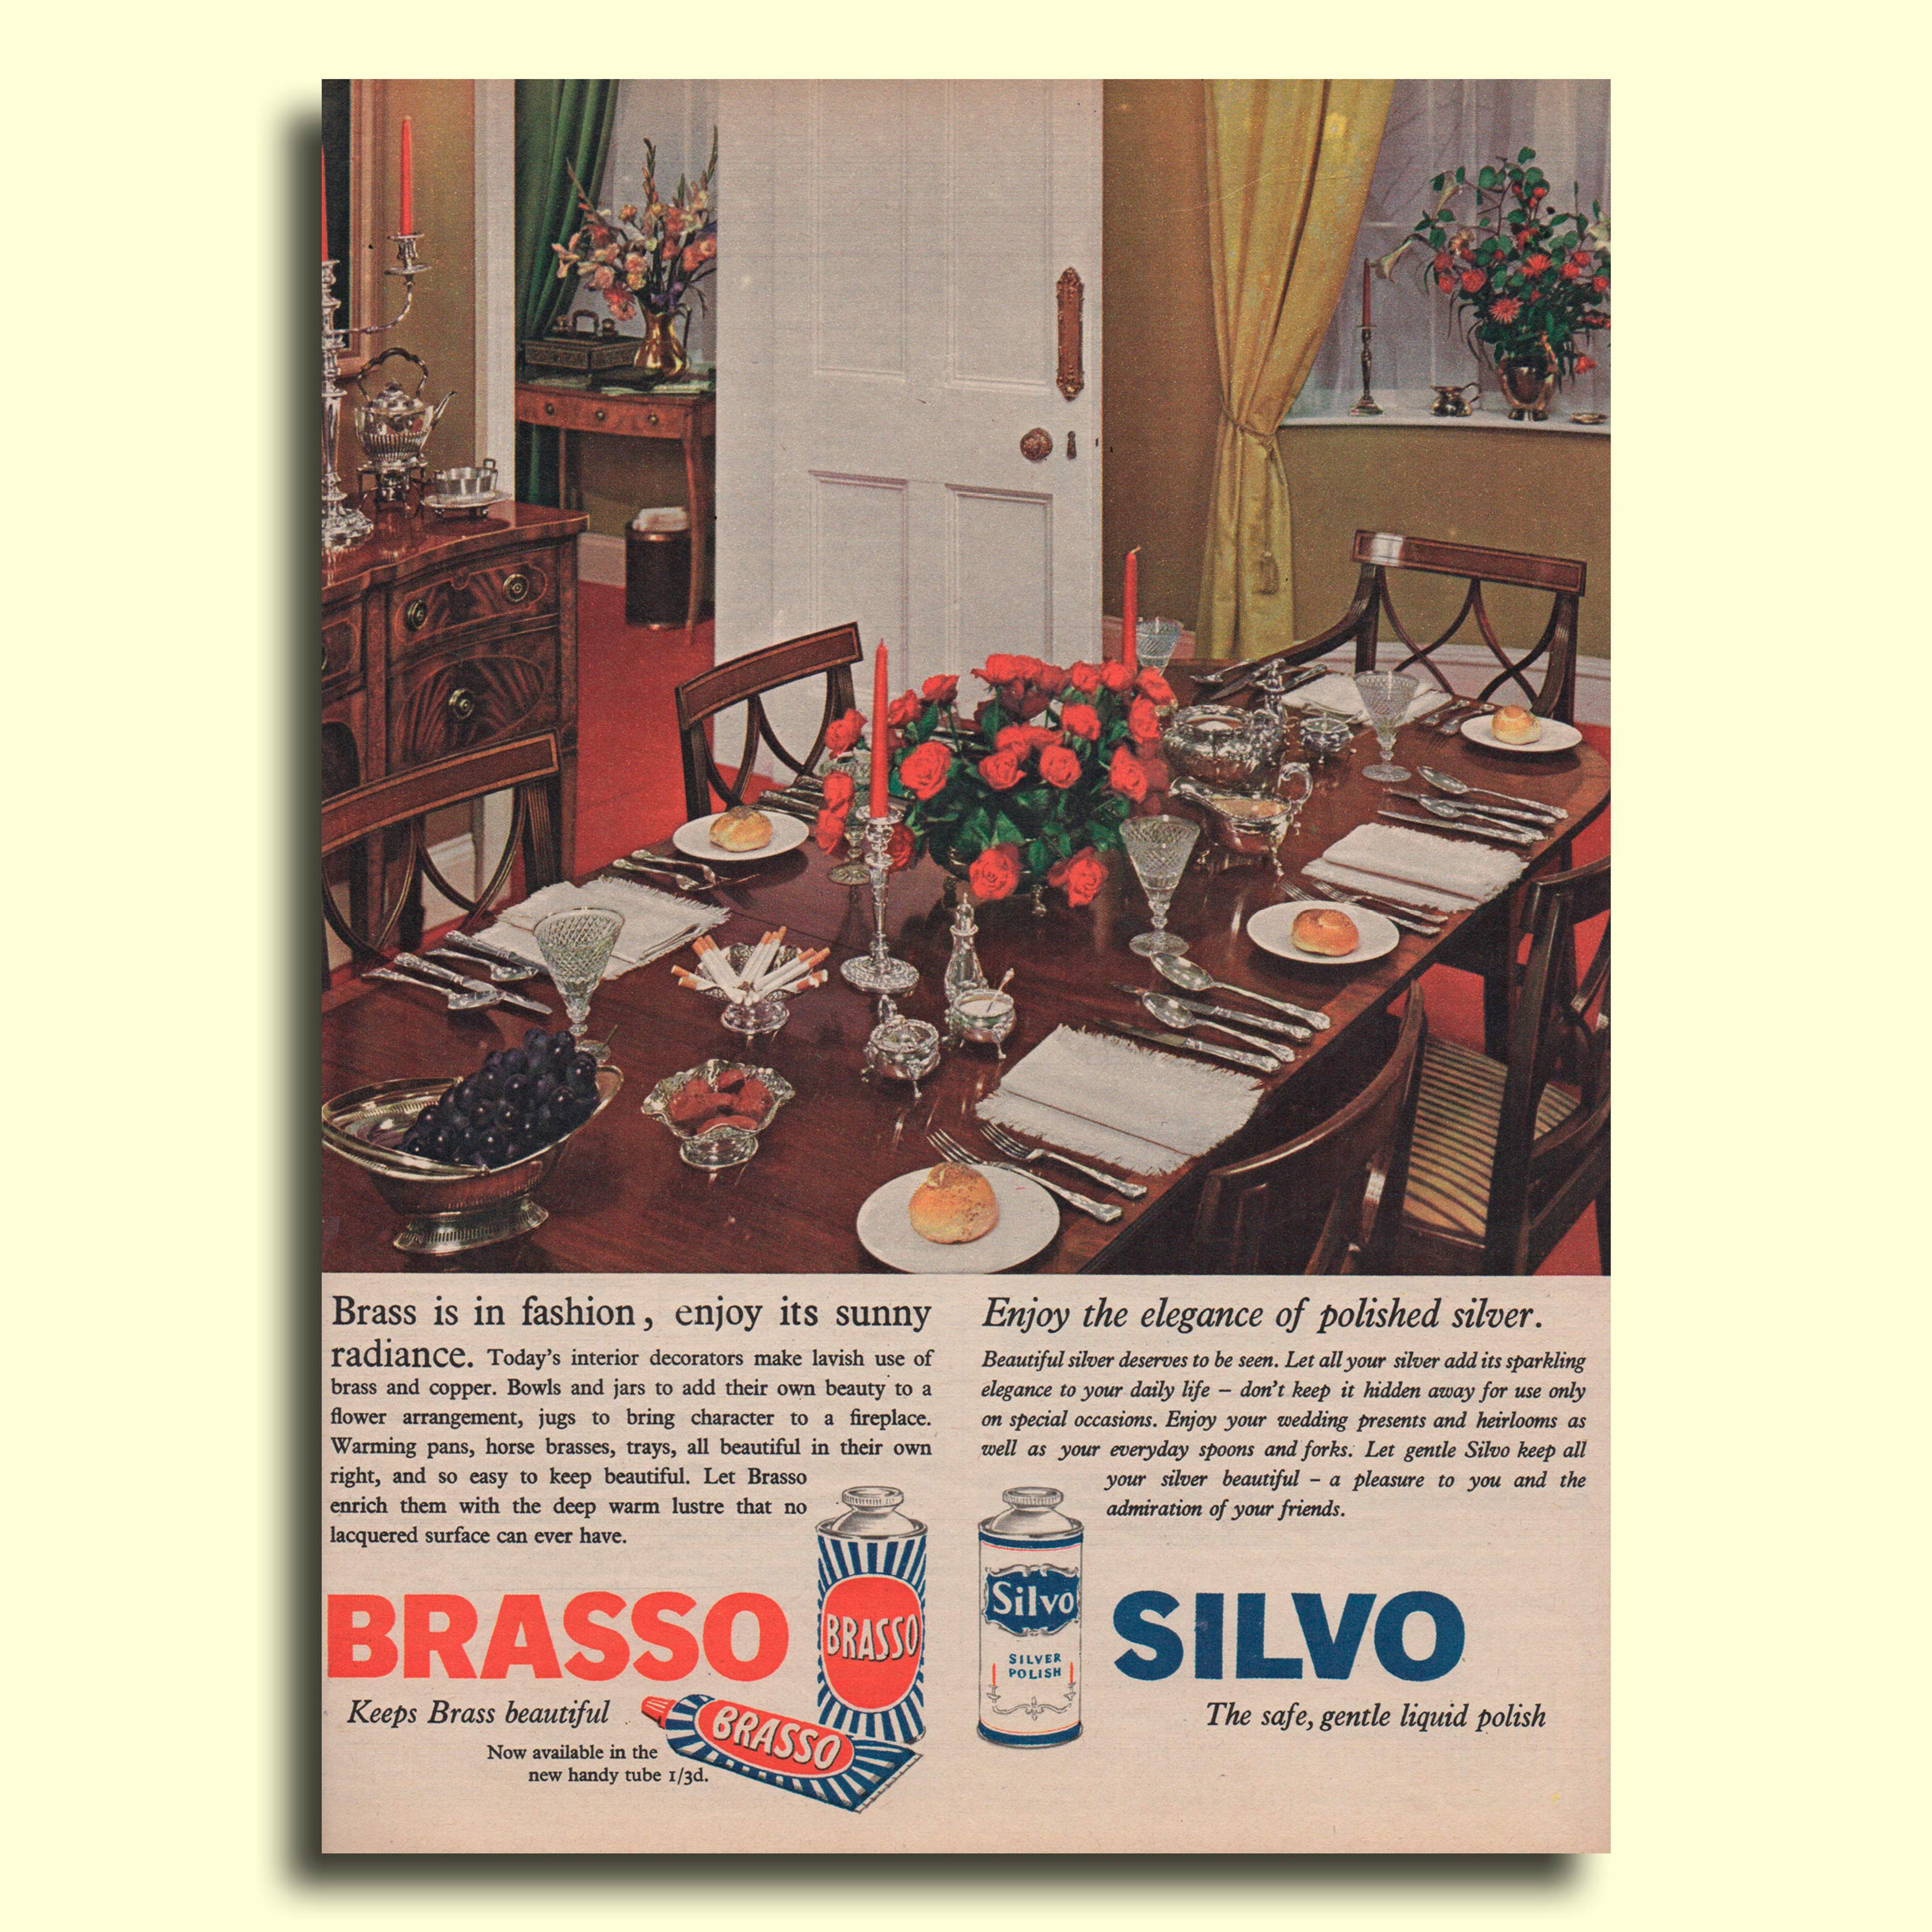 A Brasso and Silvo advert 1962. Colour photograph of a dinner table setting with silver service, candelabra, cut glass and red roses. 